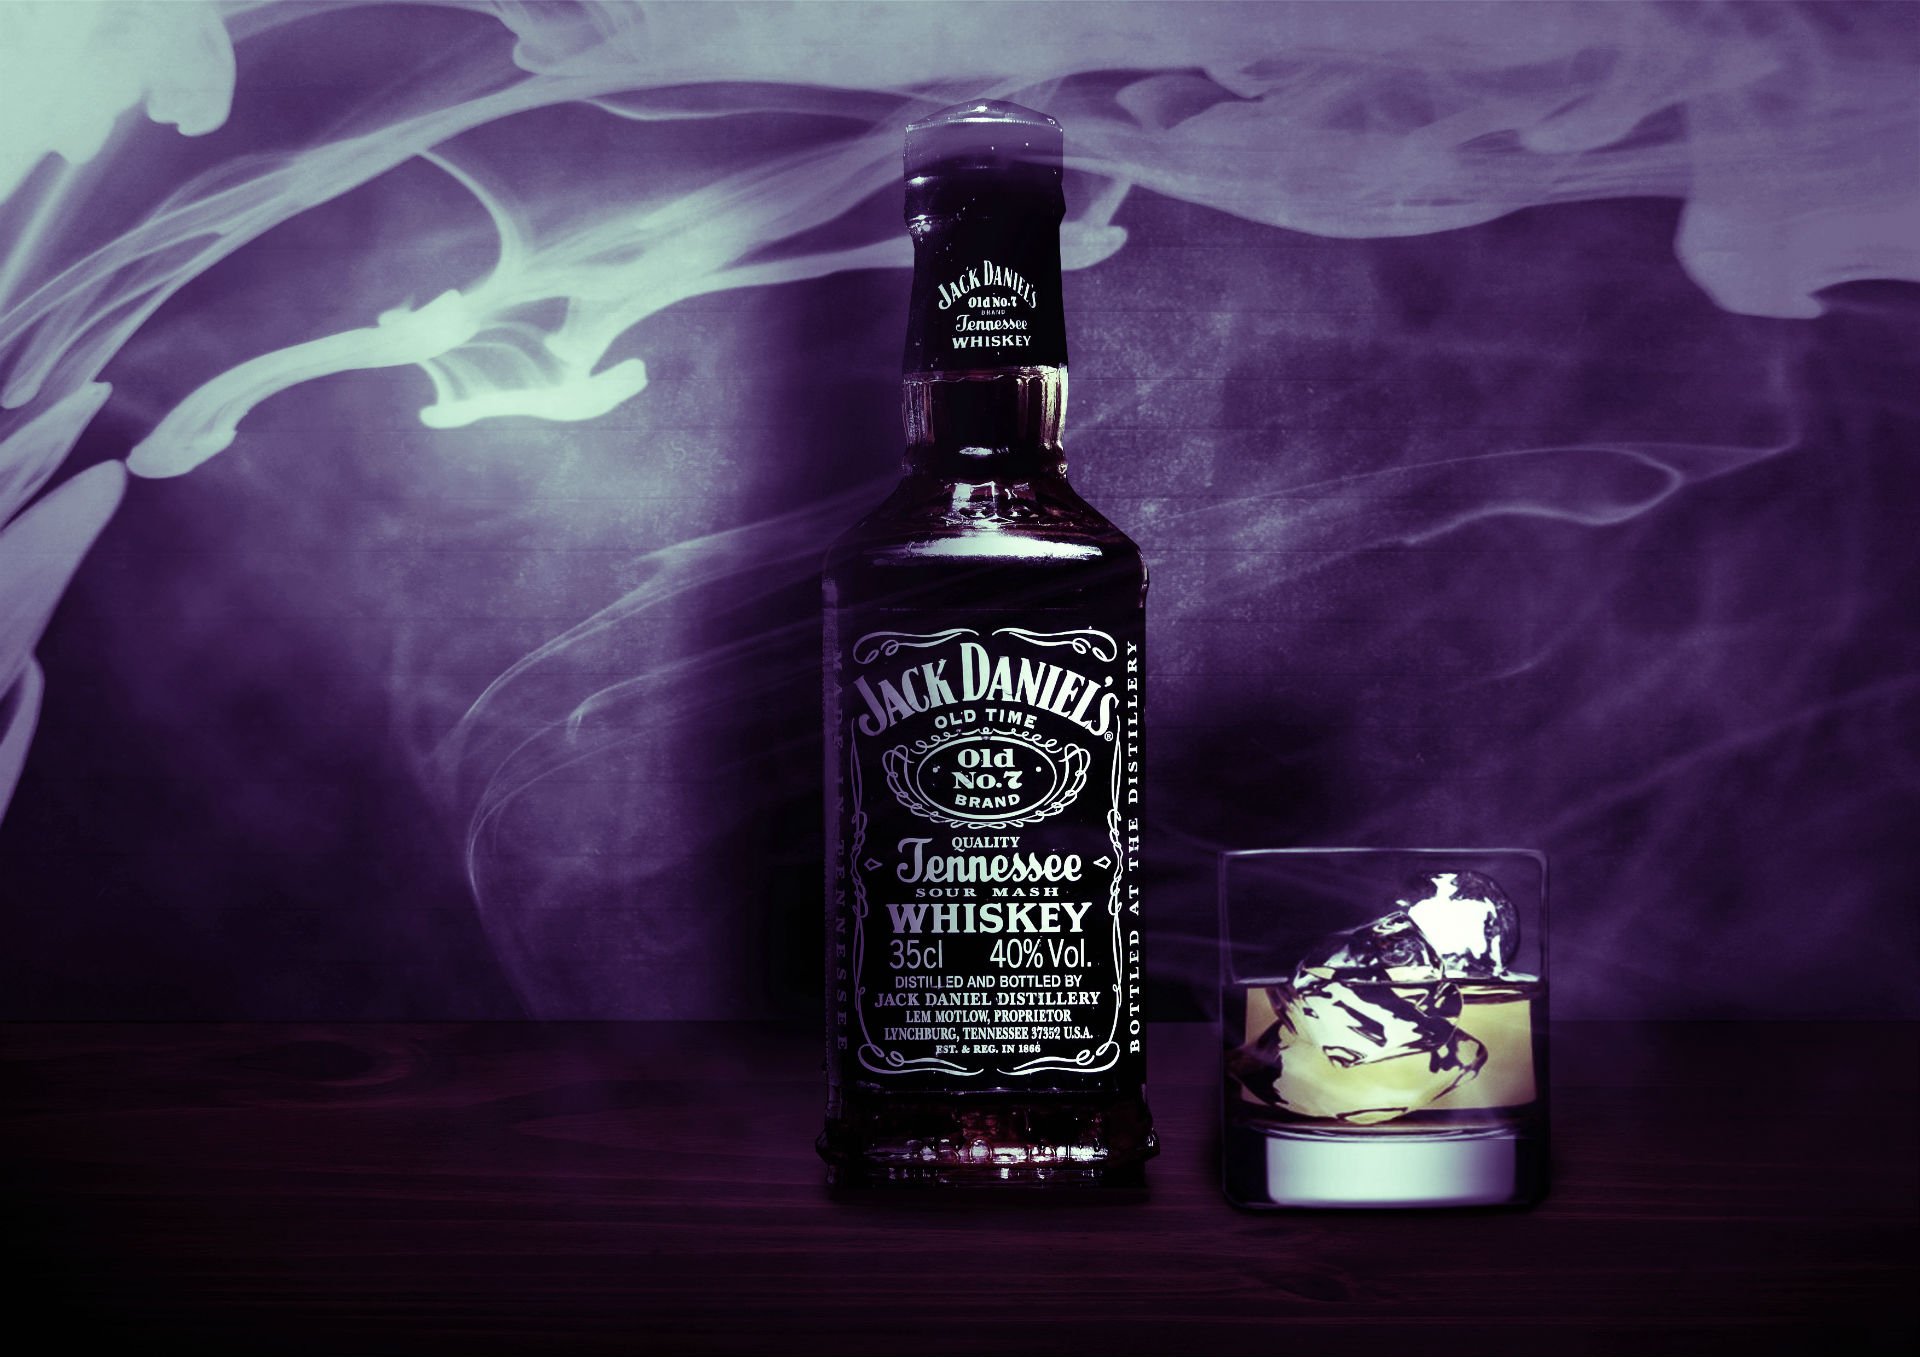 3 Jack Daniels Hd Wallpapers Background Images Wallpaper Abyss Images, Photos, Reviews